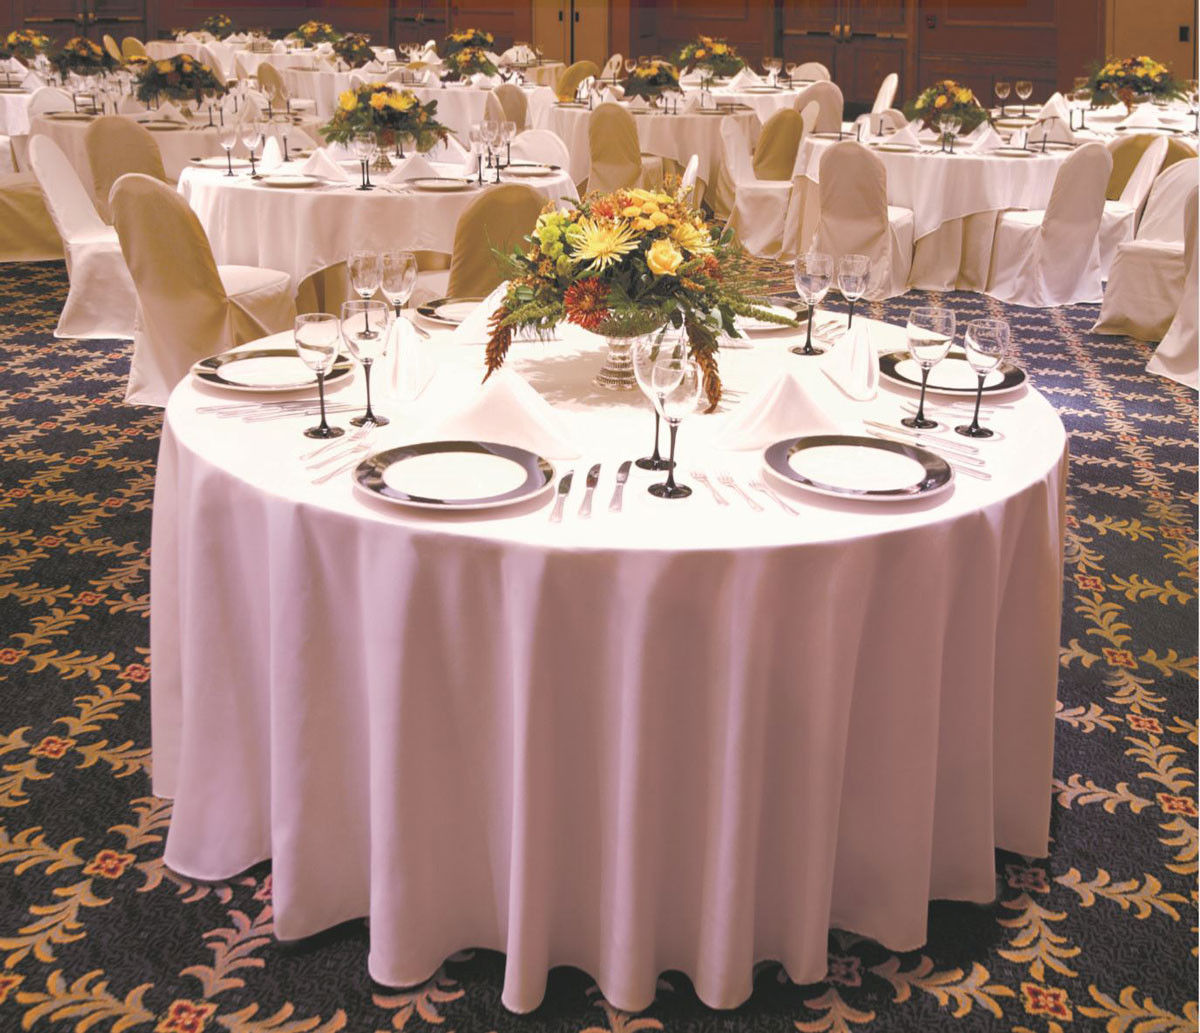 What's the texture and edge style of the 132 inch round tablecloth by Milliken?